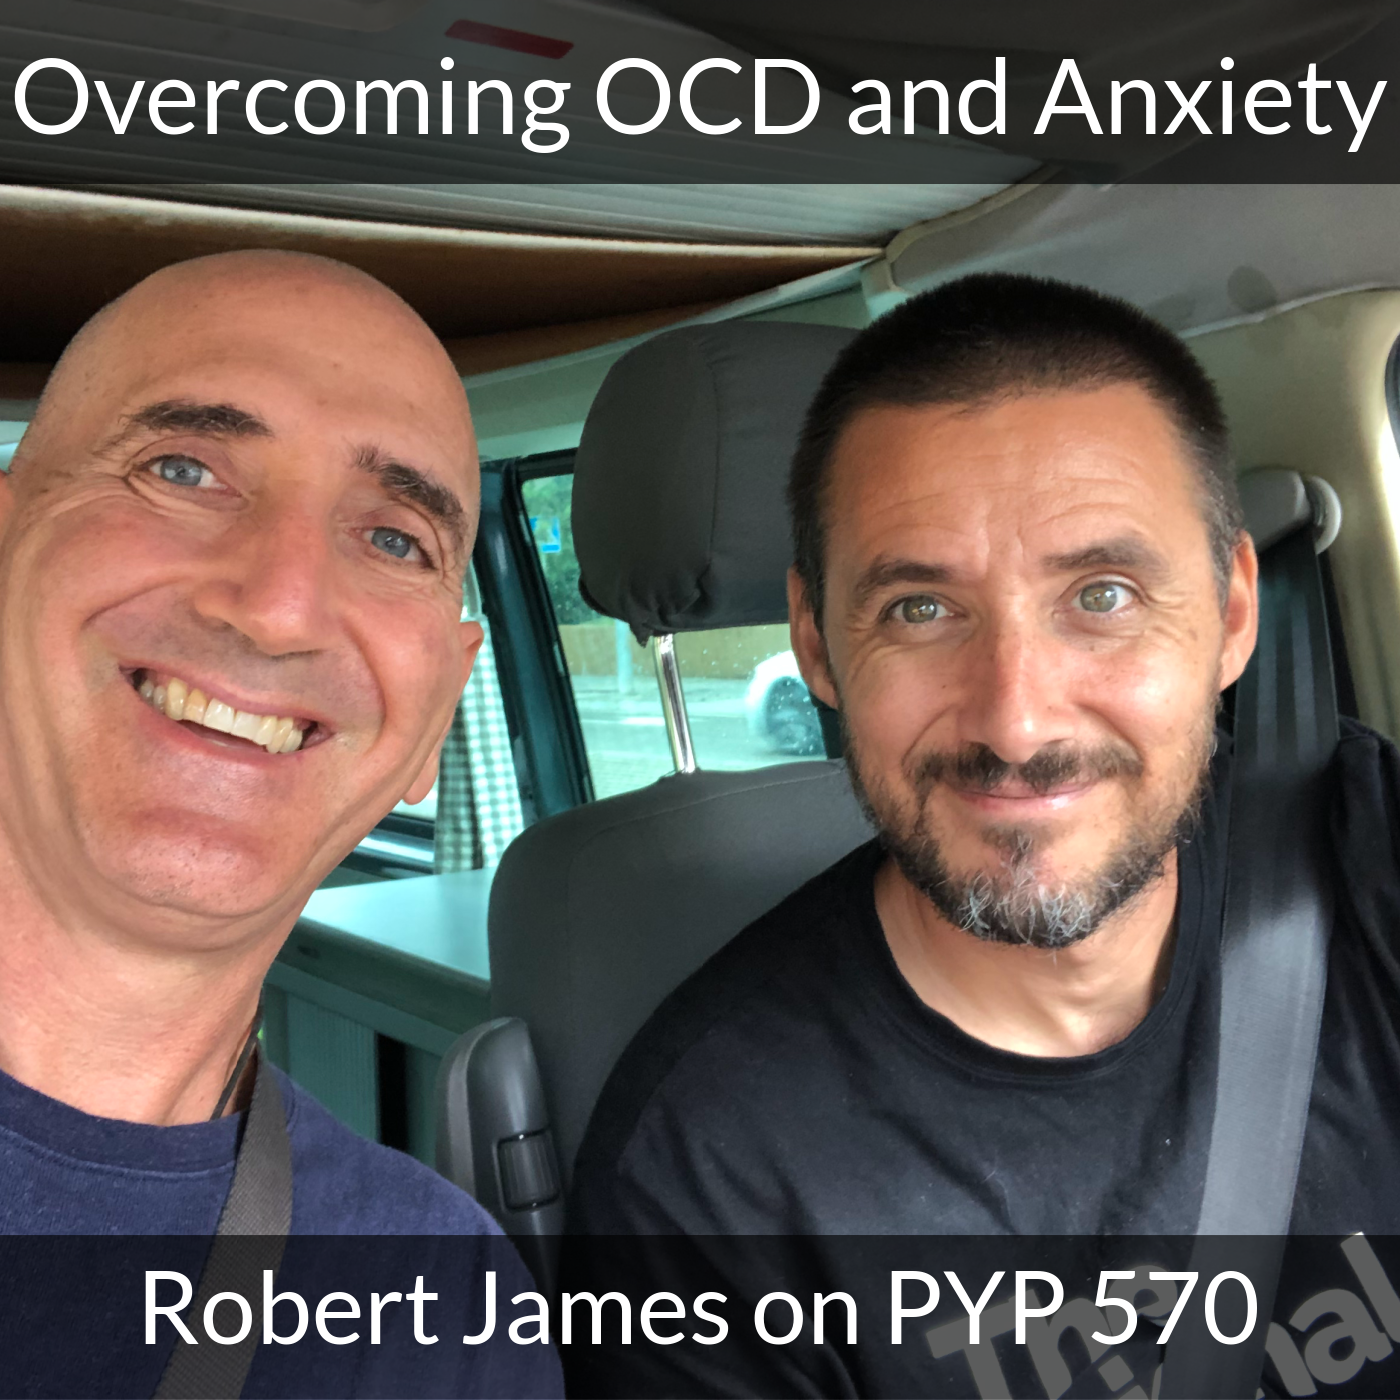 Overcoming OCD and Anxiety: Robert James on PYP 570